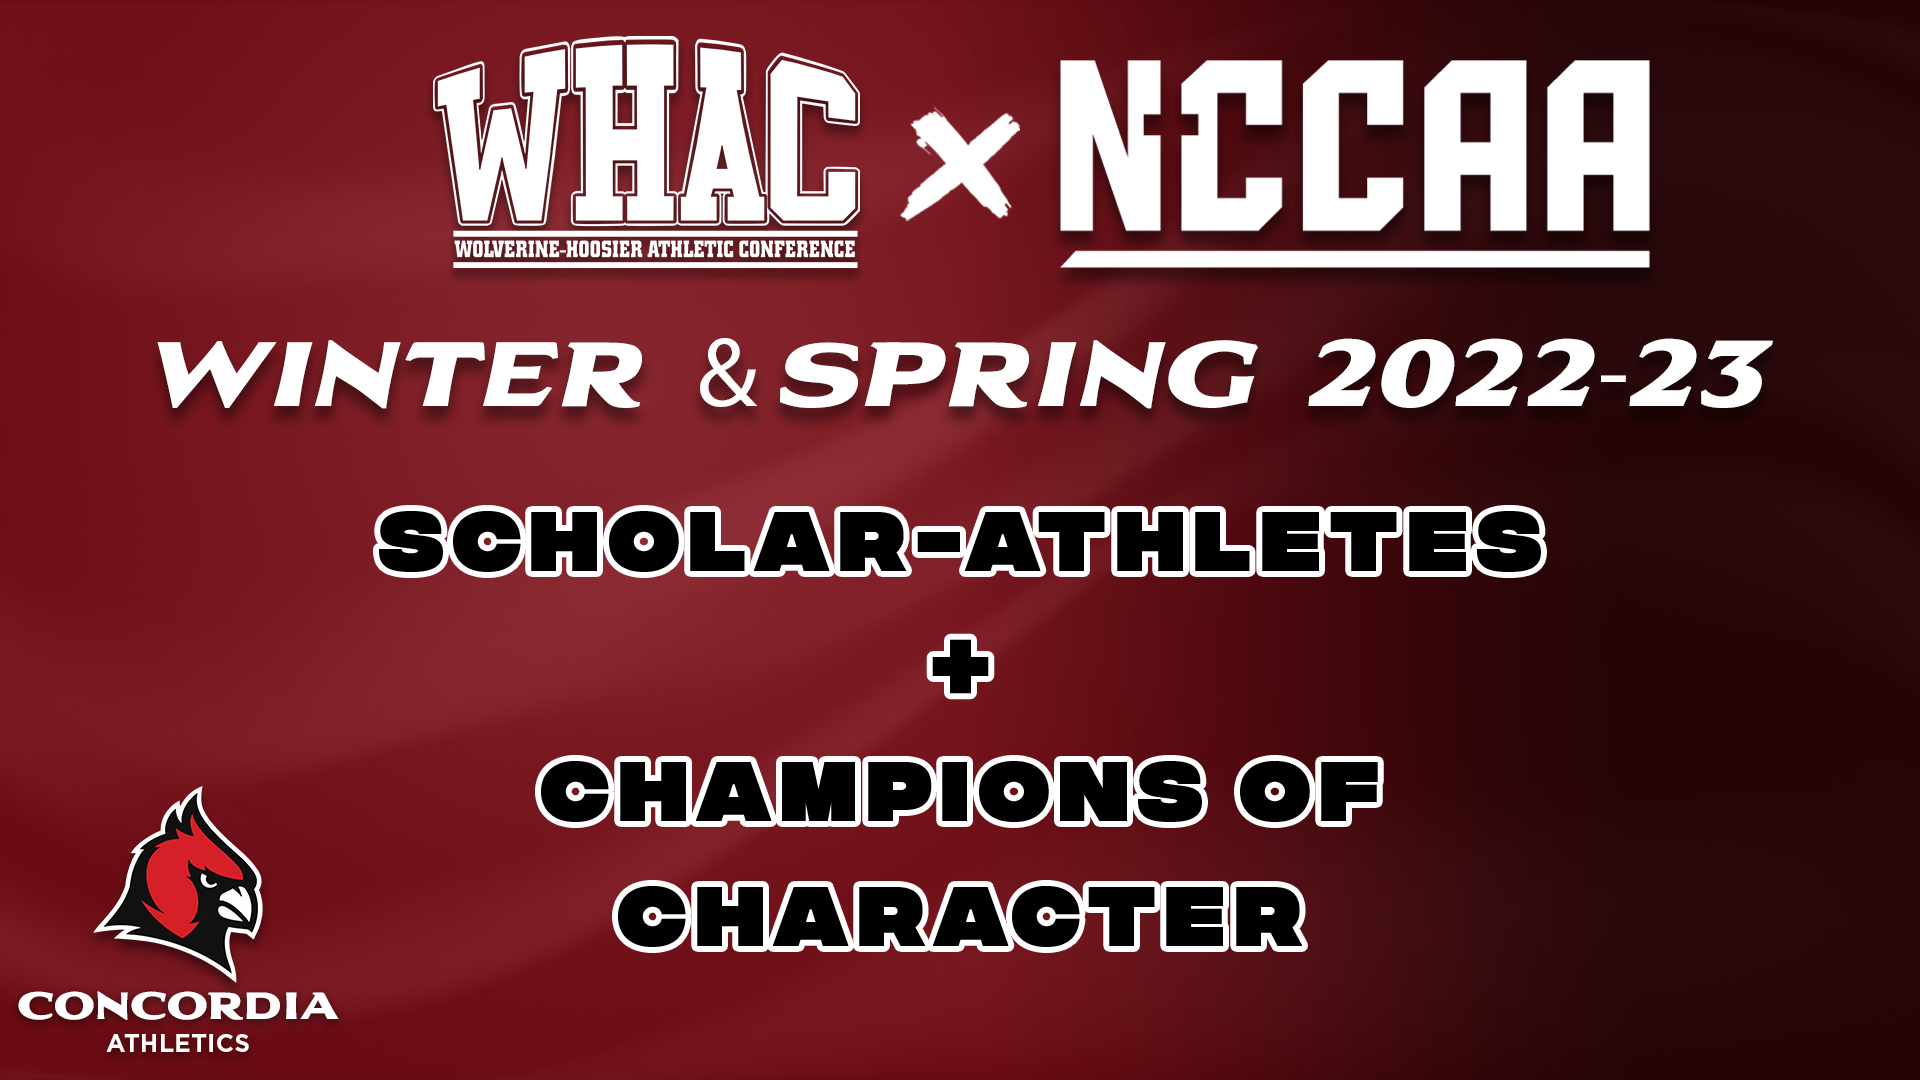 Fall Champions of Character and Scholar-Athletes Announced